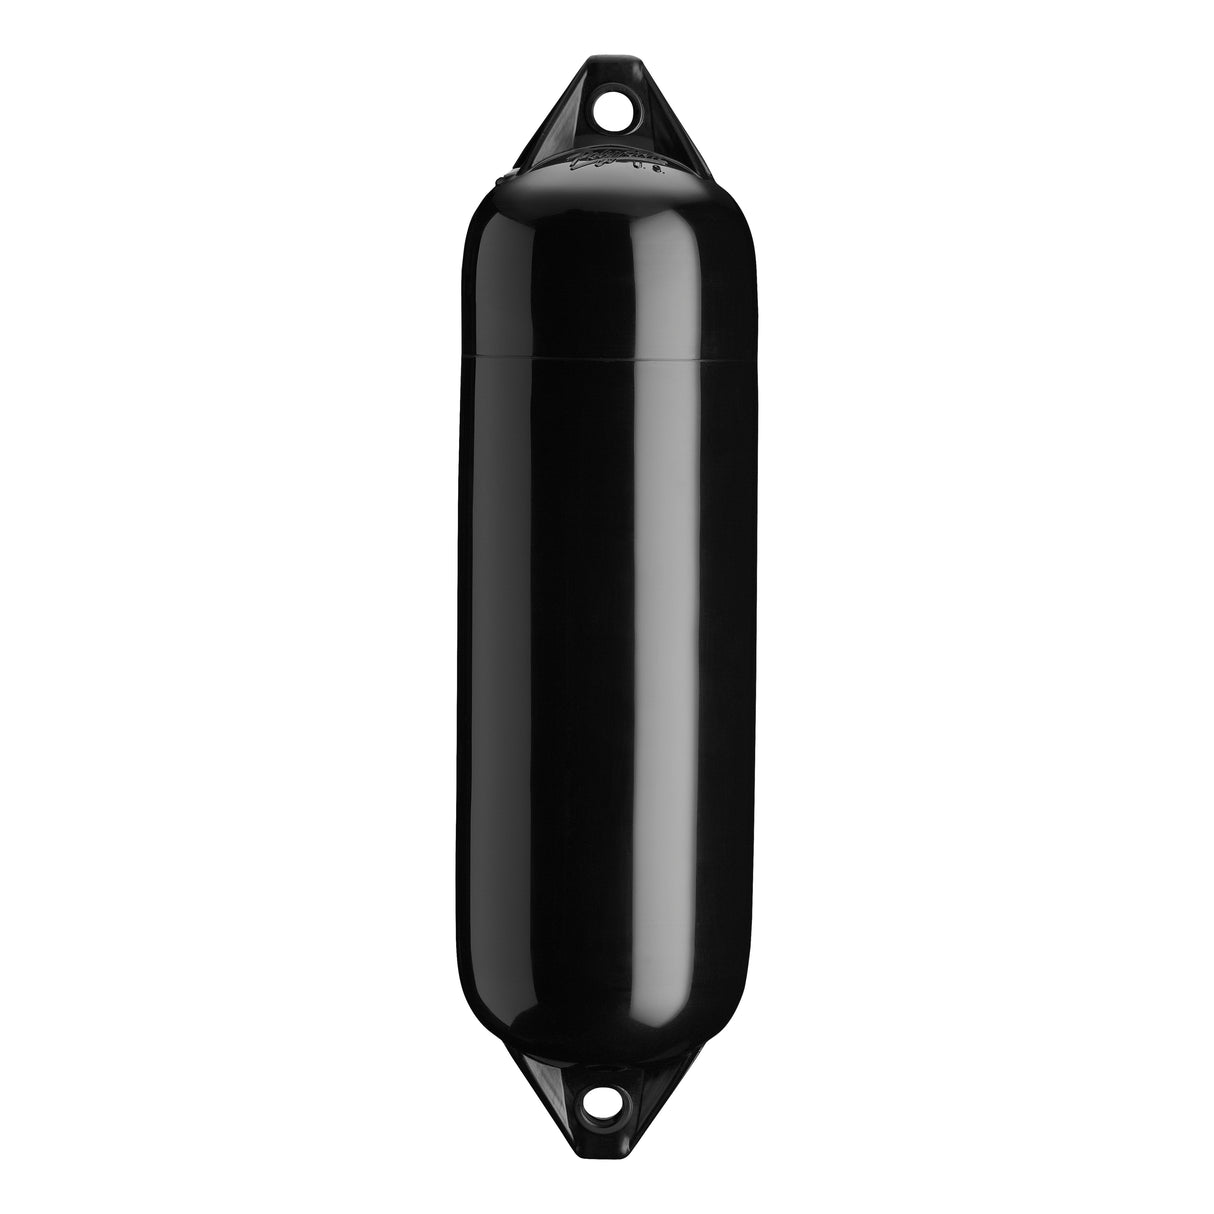 All Black boat fender with Black-Top, Polyform F-02 